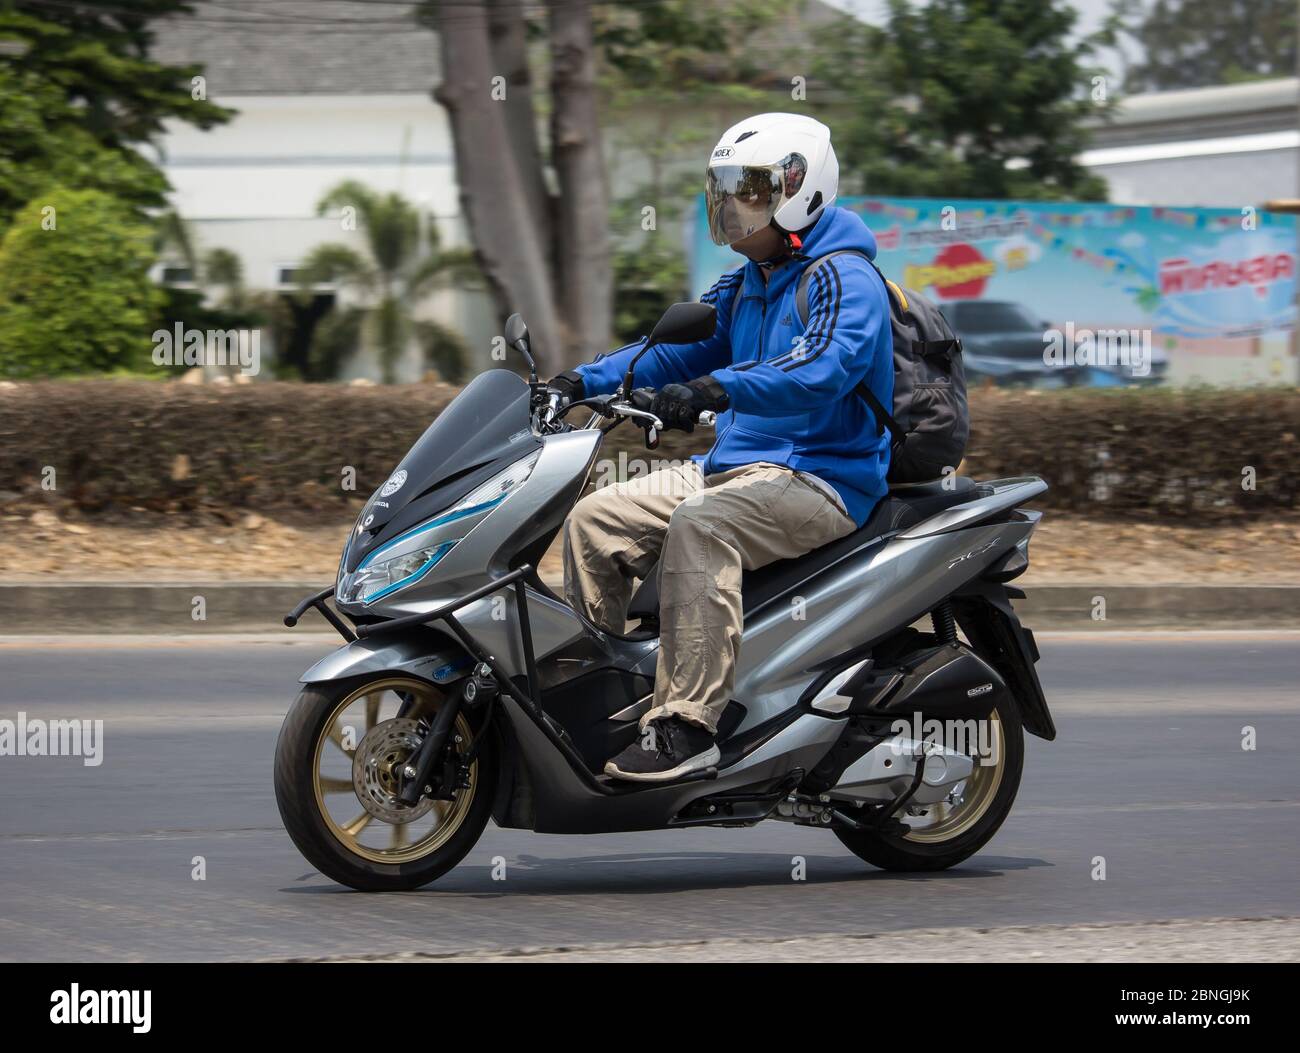 Chiangmai Thailand April 14 Man And Private Honda Motorcycle Pcx 150 On Road No 1001 8 Km From Chiangmai Business Area Stock Photo Alamy